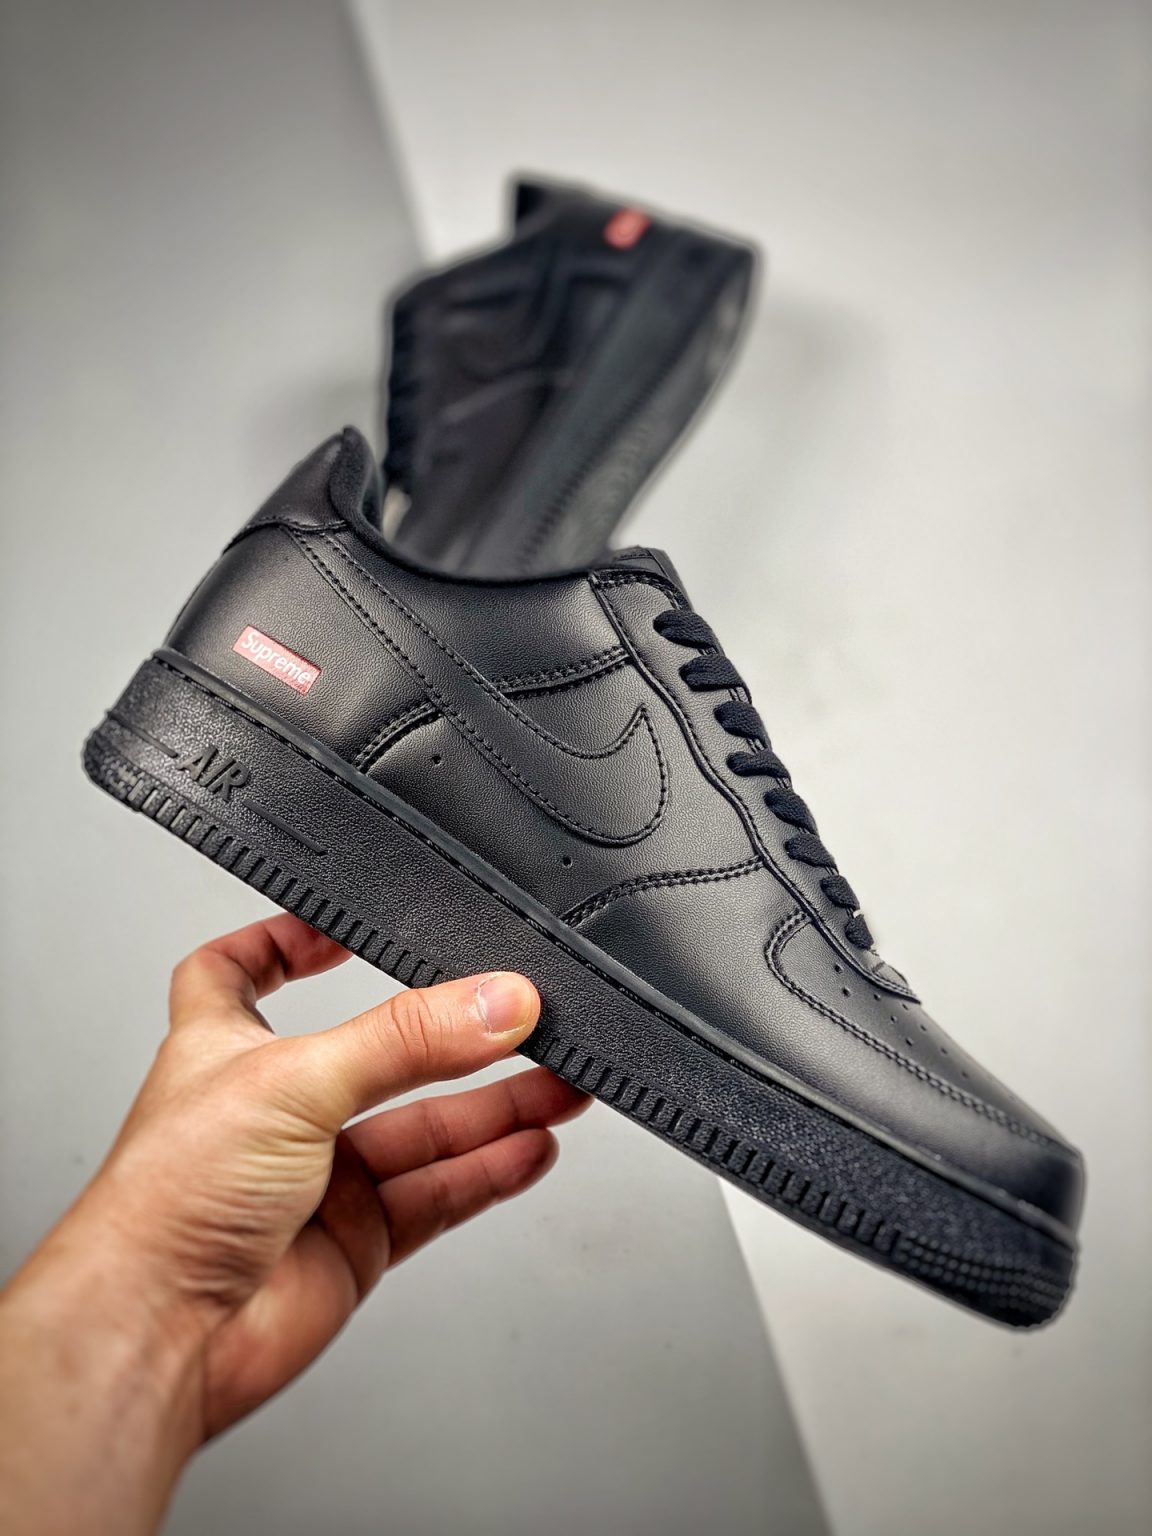 Supreme x Nike Air Force 1 Low Black CU9225-001 For Sale – Sneaker Hello